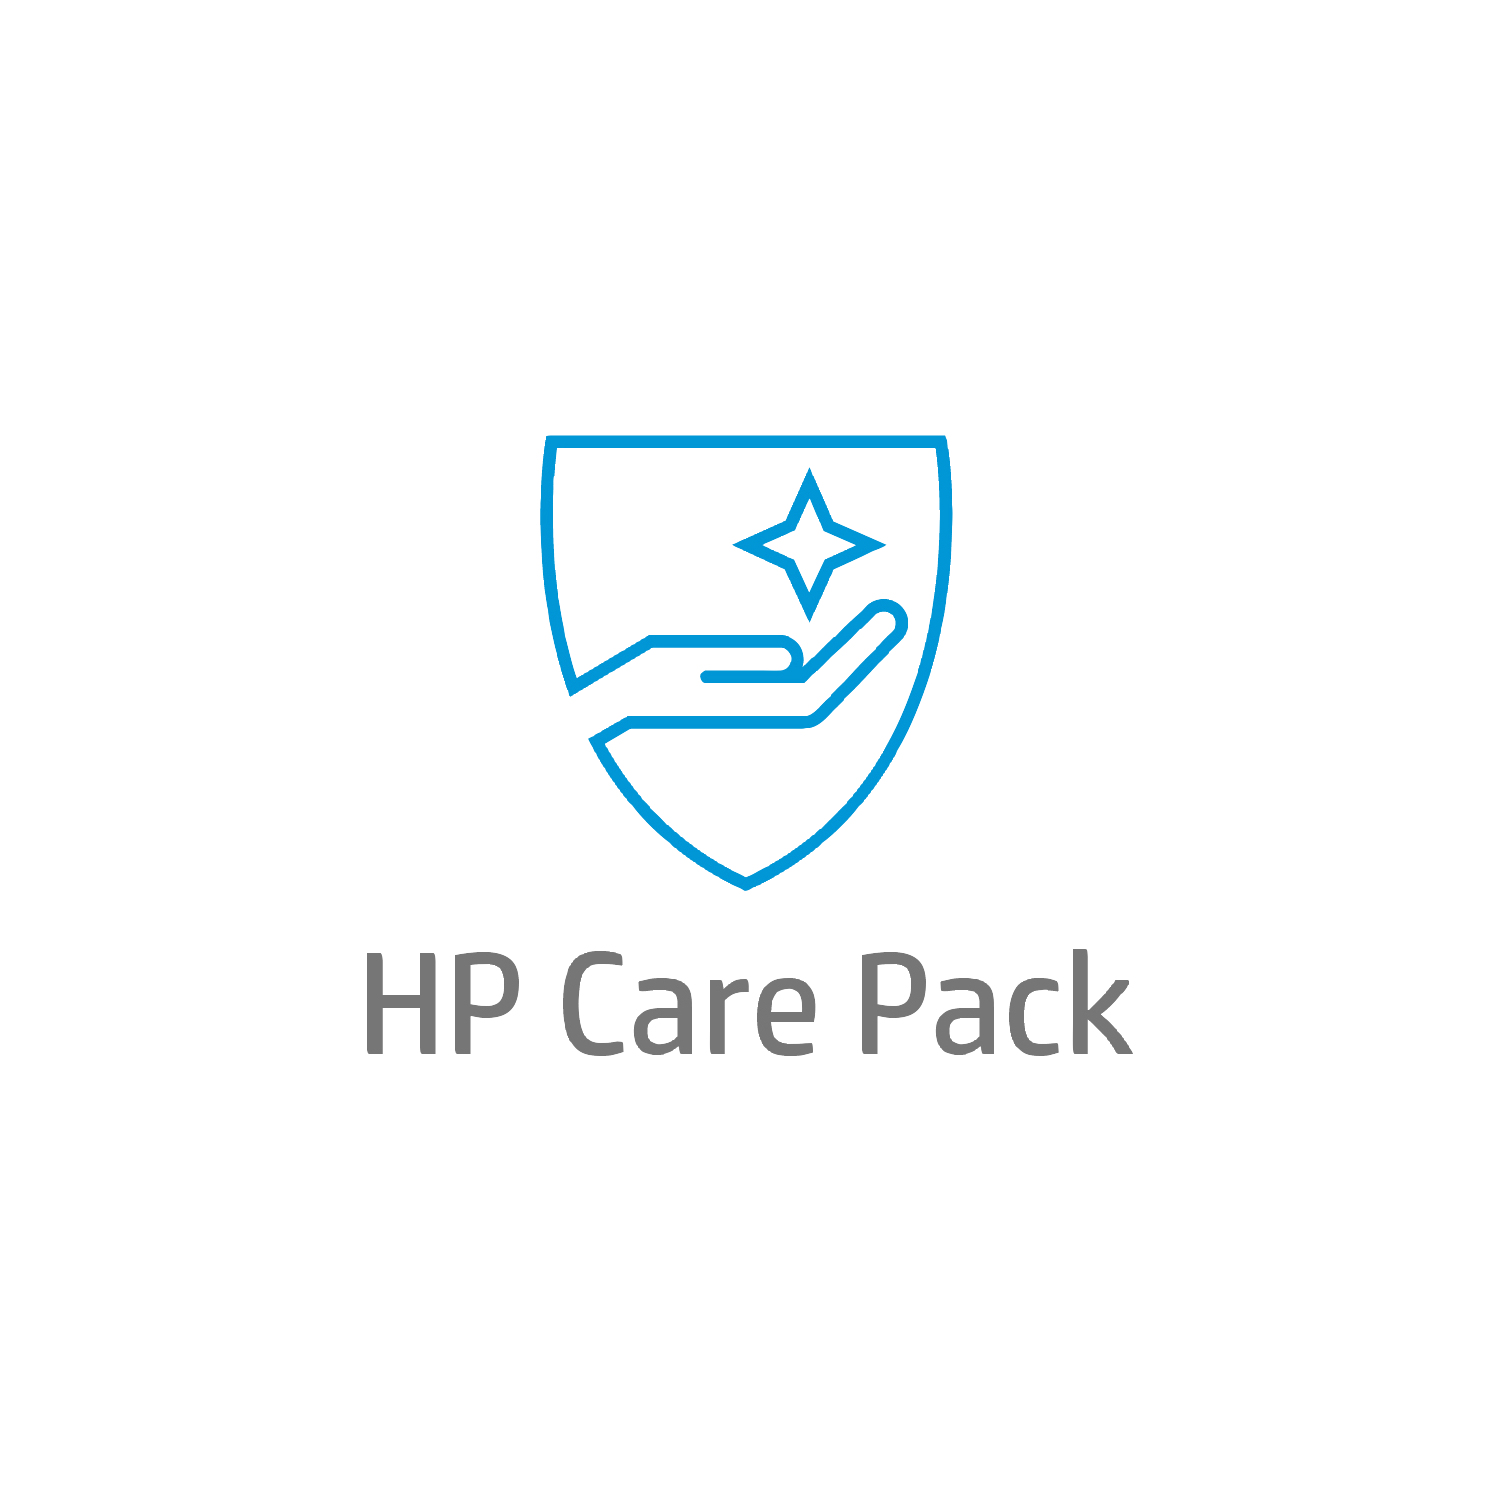 Electronic HP Care Pack Next Business Day Hardware Support